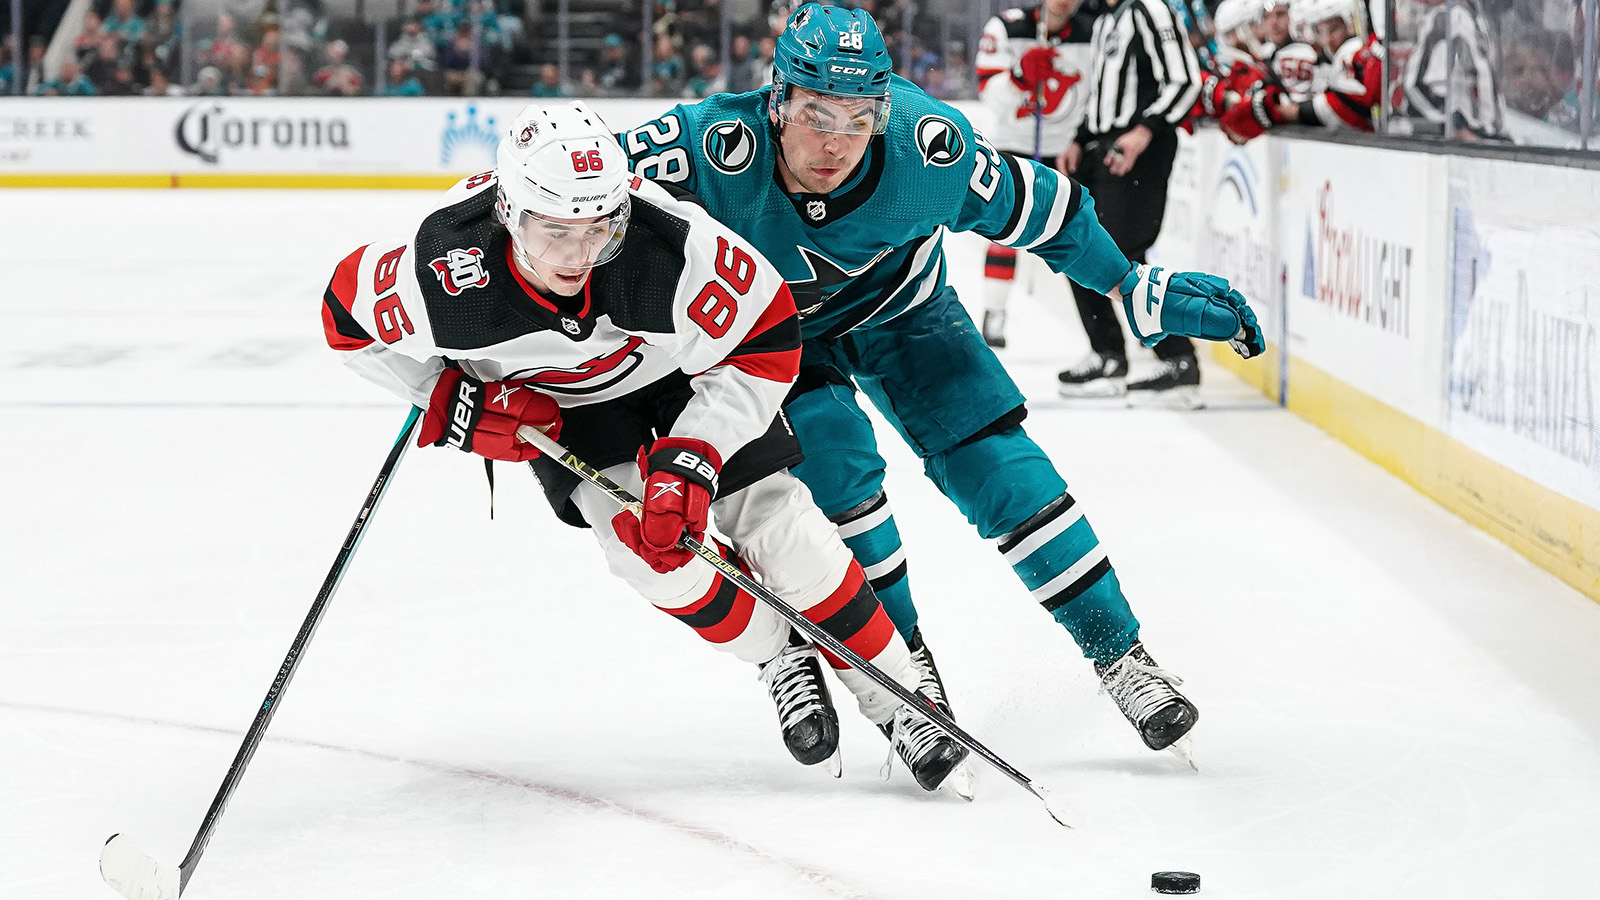 Timo Meier trade seems likely for San Jose Sharks, Mike Grier